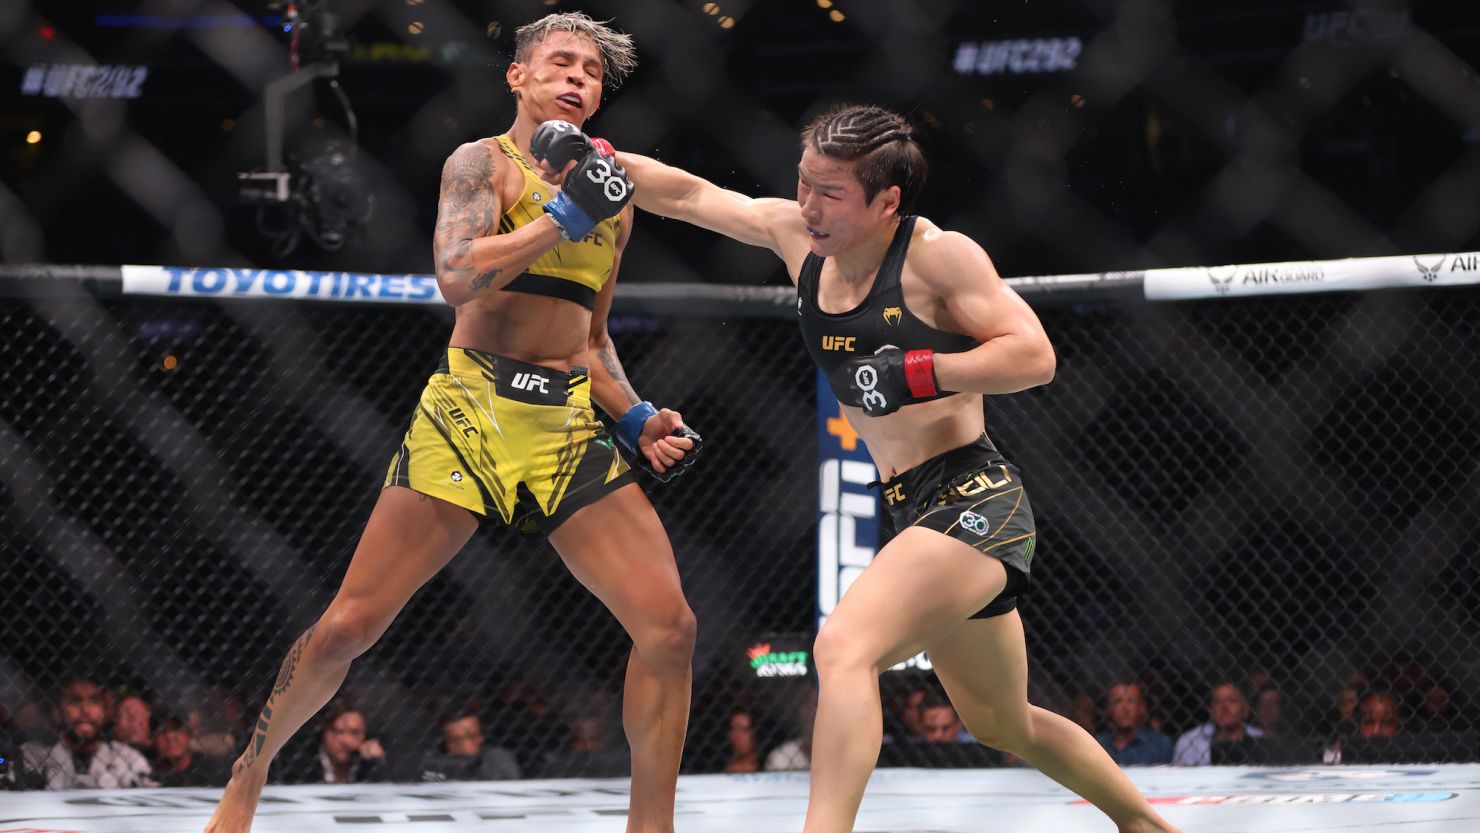 Zhang Weili of China punches Amanda Lemos during their strawweight title fight at UFC 292 at TD Garden on August 19 in Boston, Massachusetts